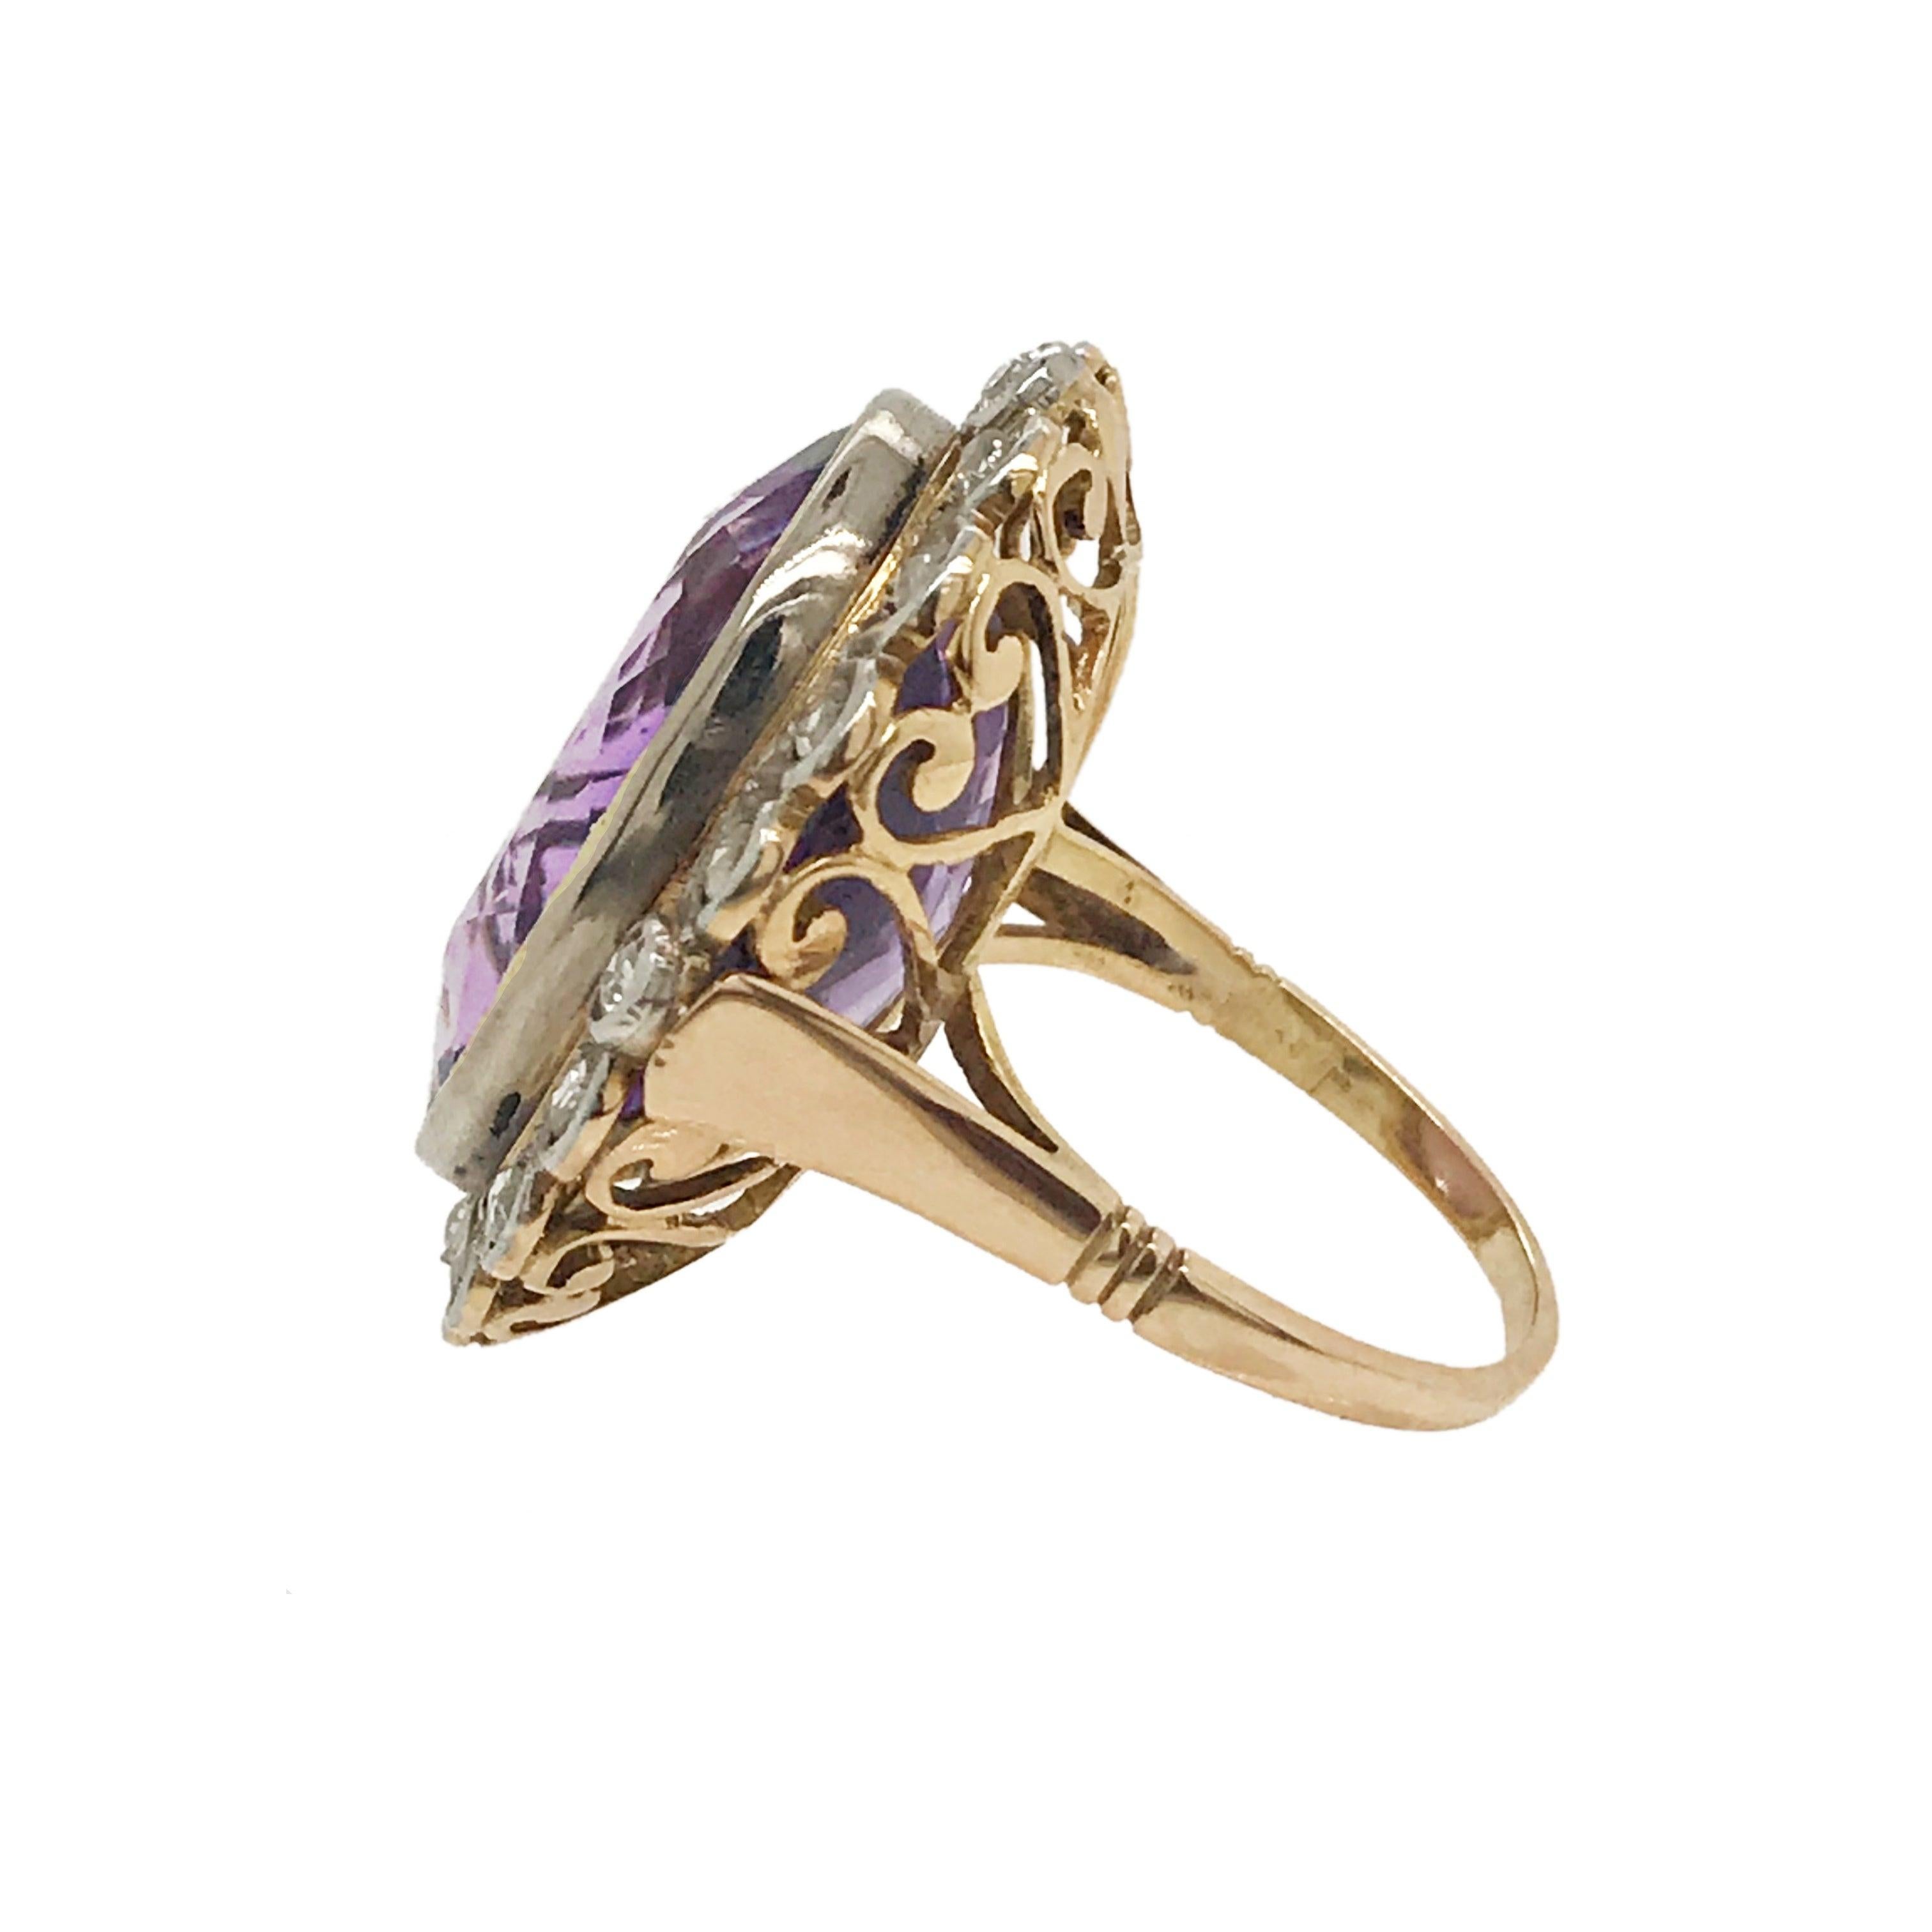 Oval Cut Vintage 16 Carat Amethyst and Diamond Ring Set in 18 Karat Gold For Sale